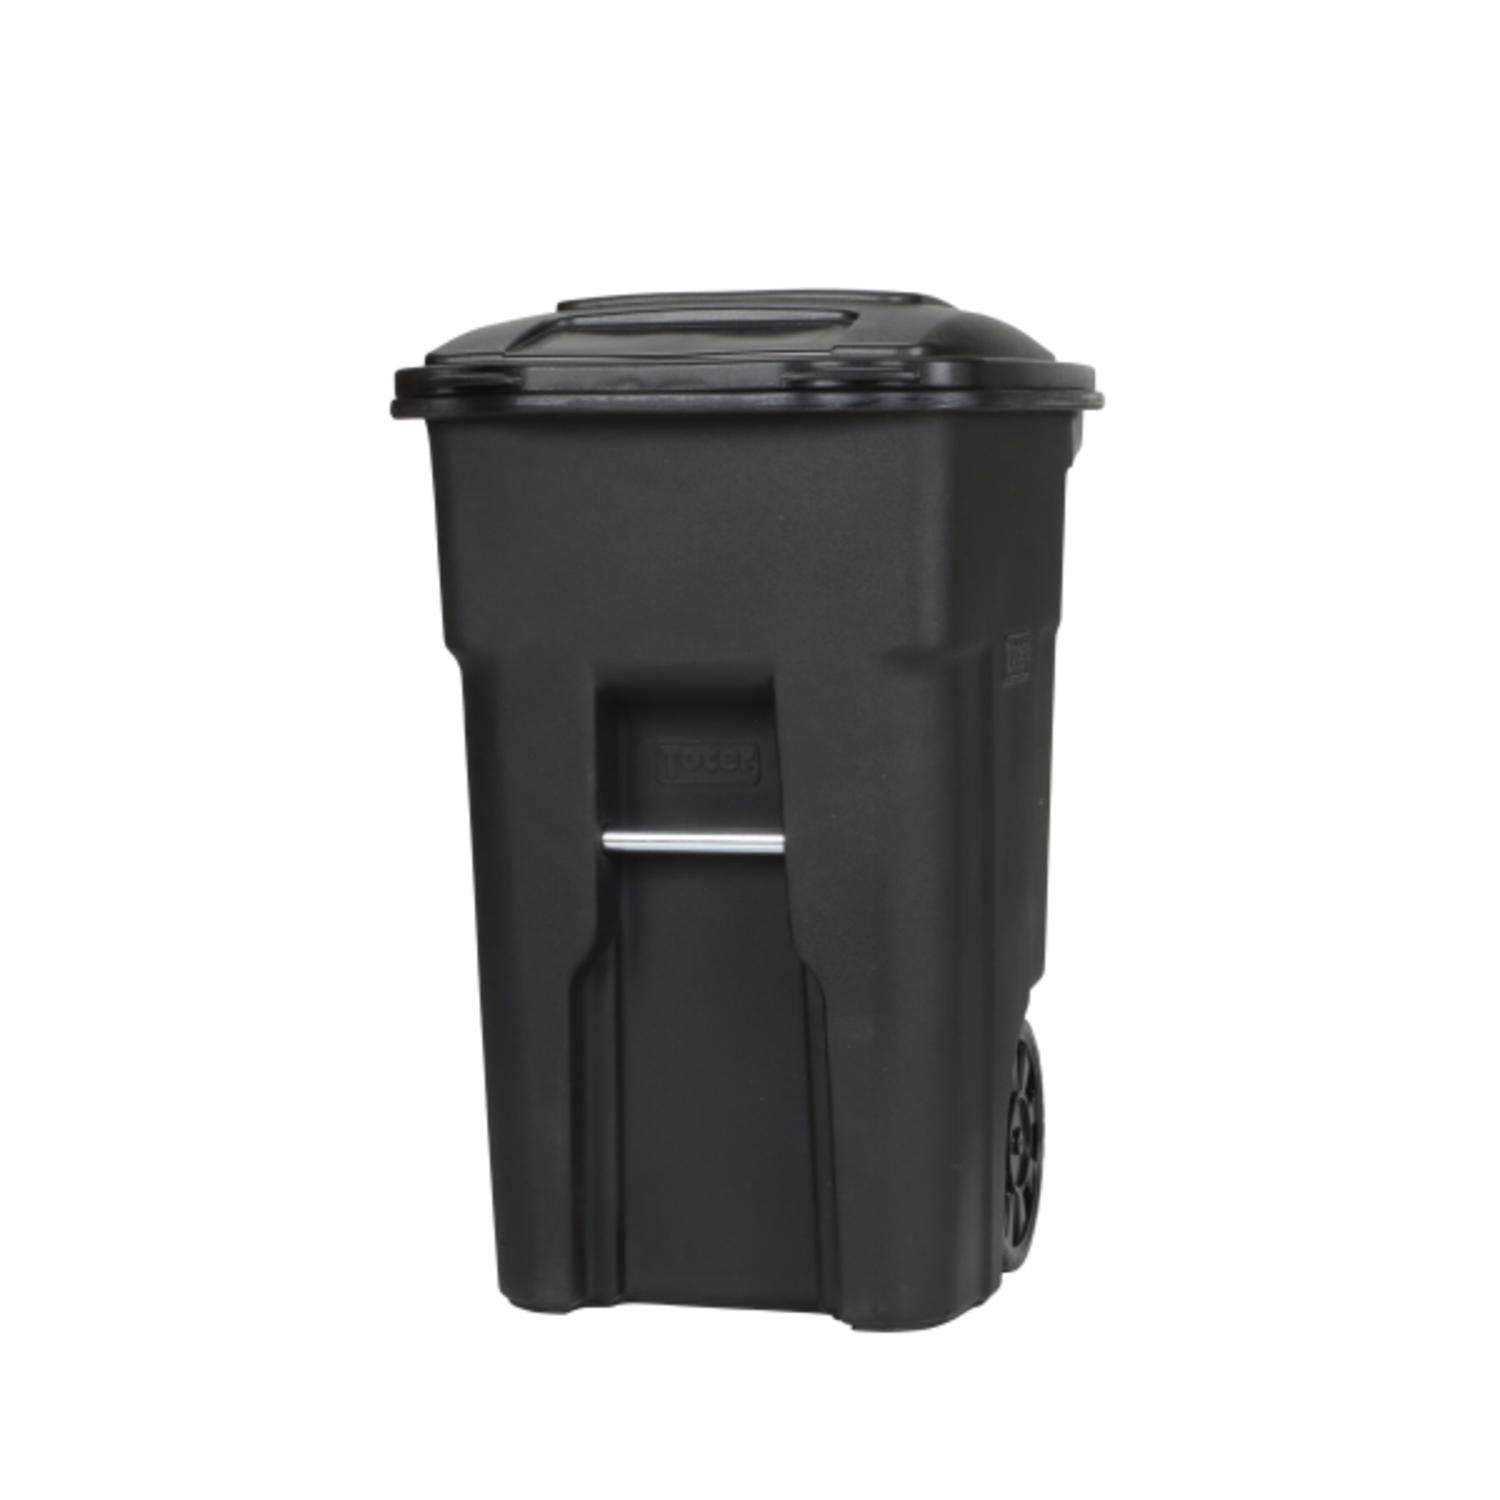 Automobiles Motorcycles Other Exterior Accessories Car Trash Trashcan  Interior Automotive Accessories Vehicle Waste Holder With Lid Car  Necessities.